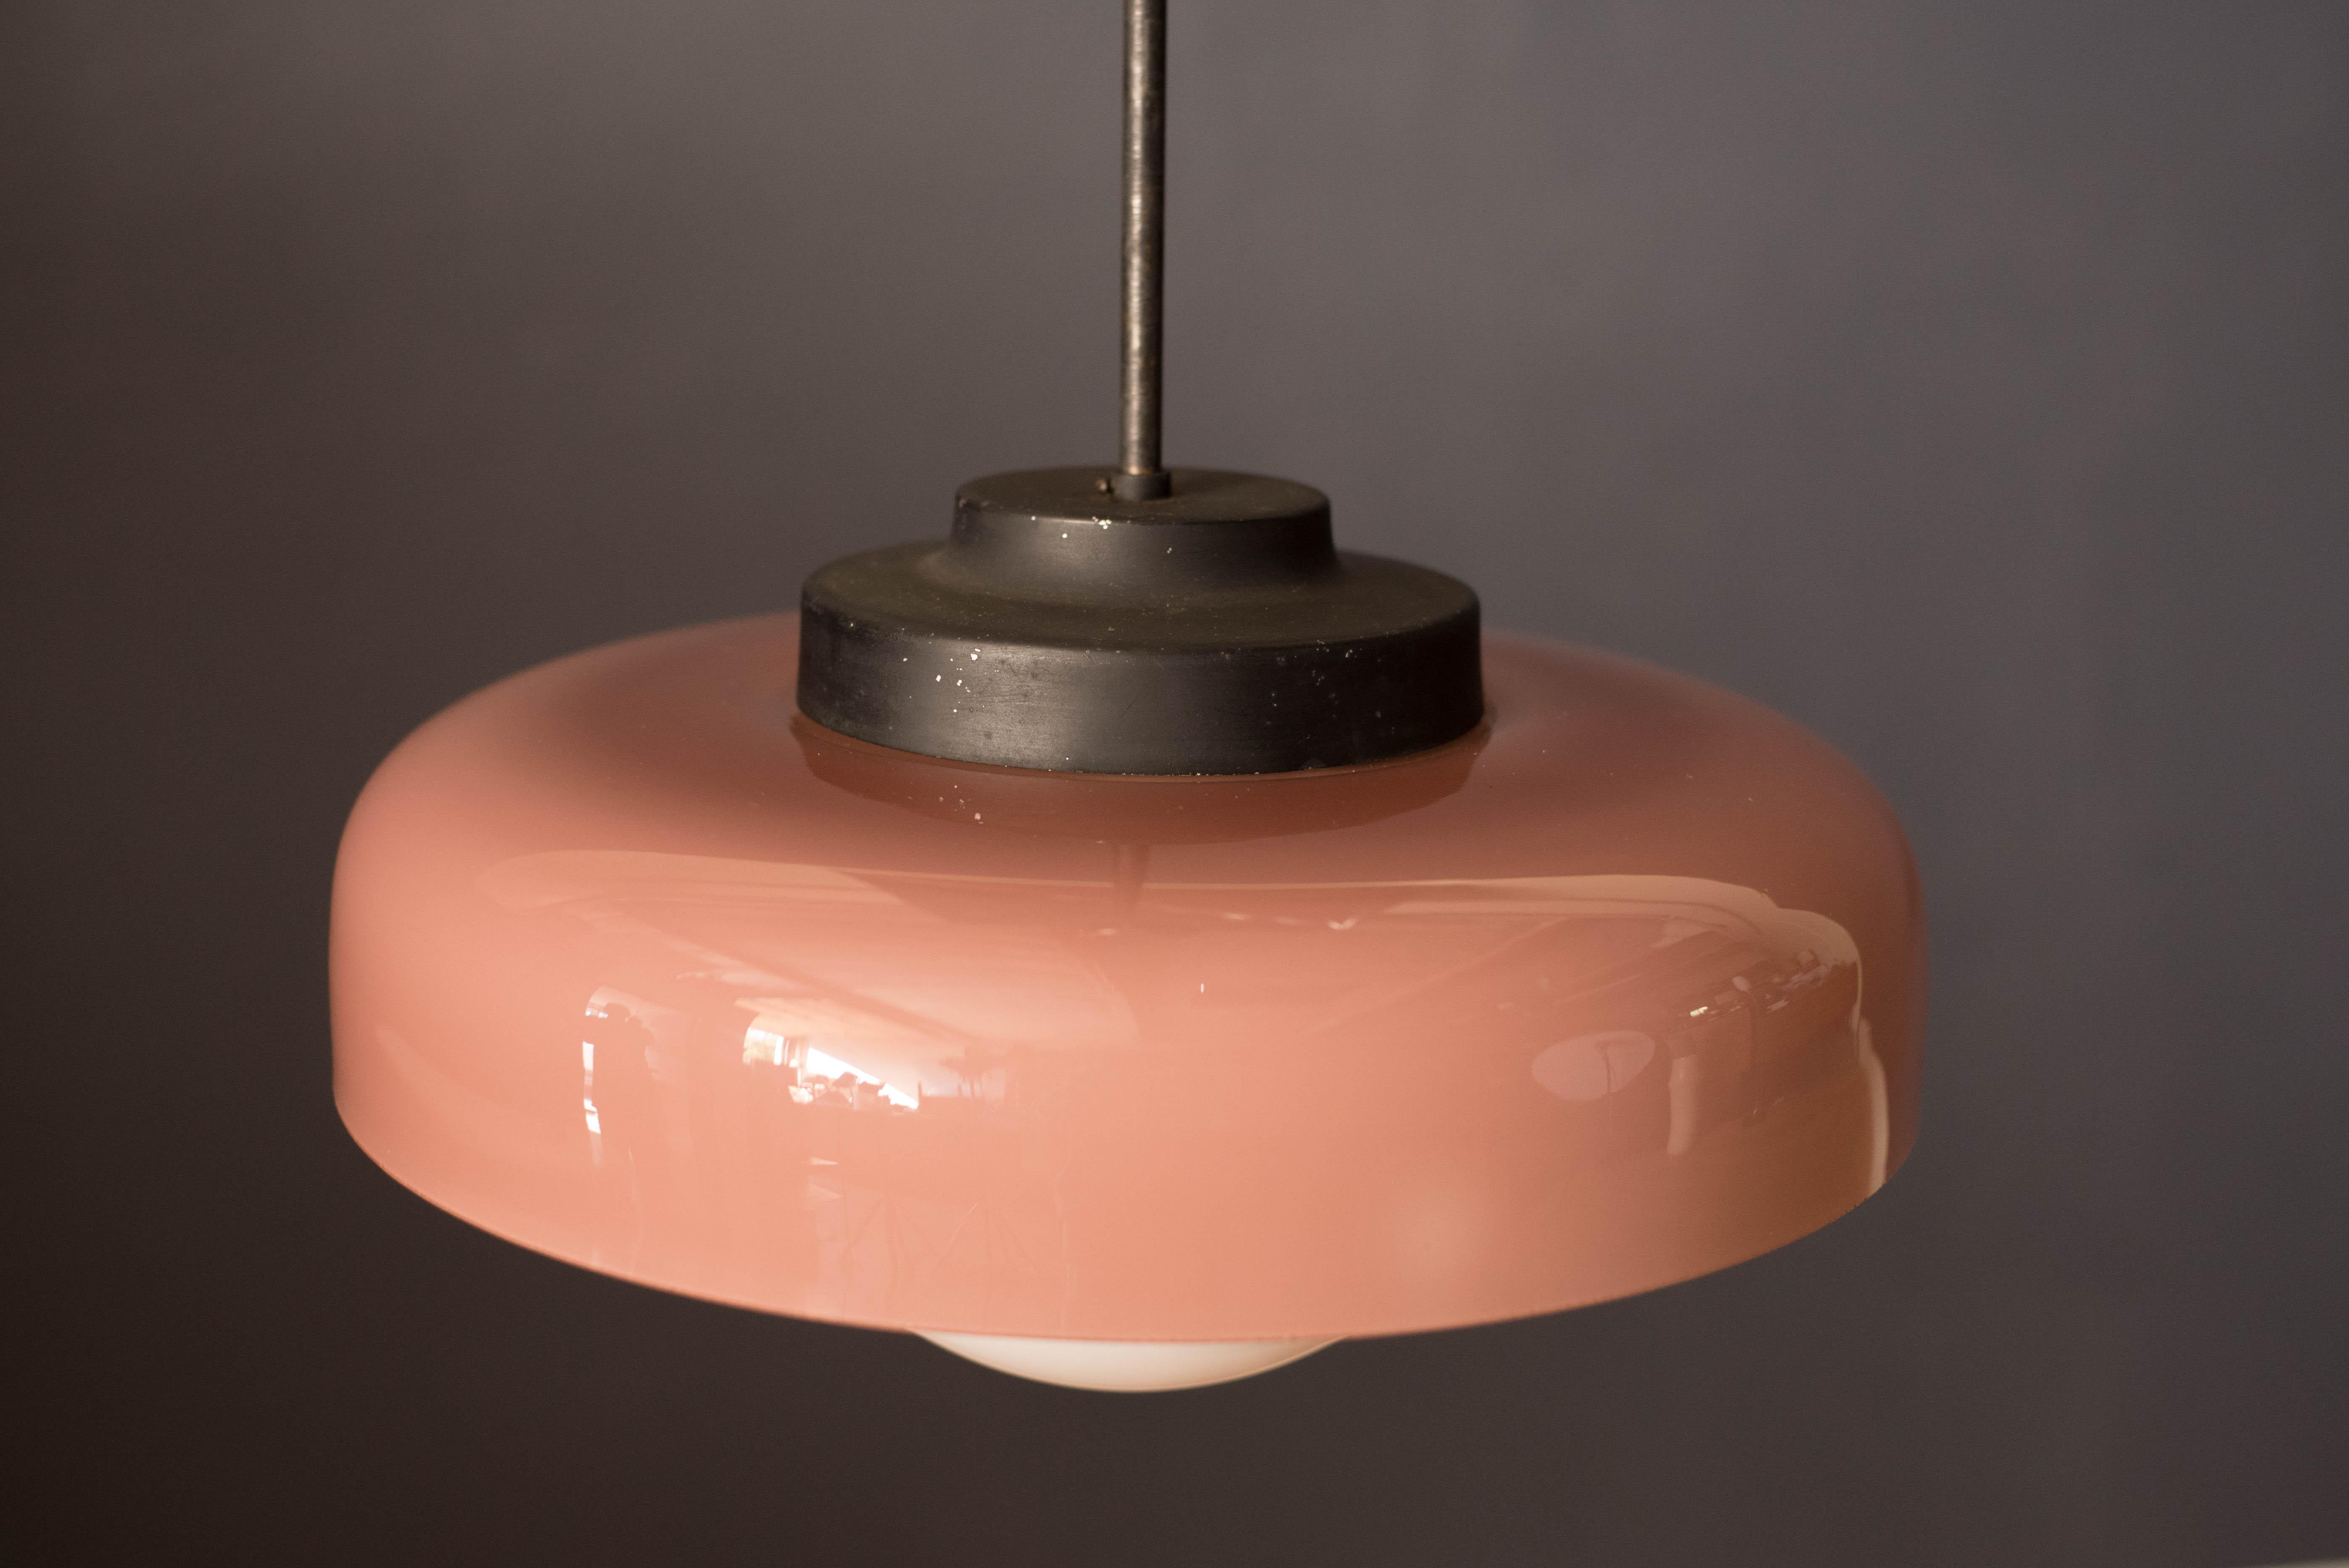 Mid-Century Modern hanging glass pendant, circa 1960s. This Classic light fixture gives a soft glow with an architectural element. Includes a two-toned blush pink shade with white interior, round glass globe, plus hanging metal rod and ceiling plate